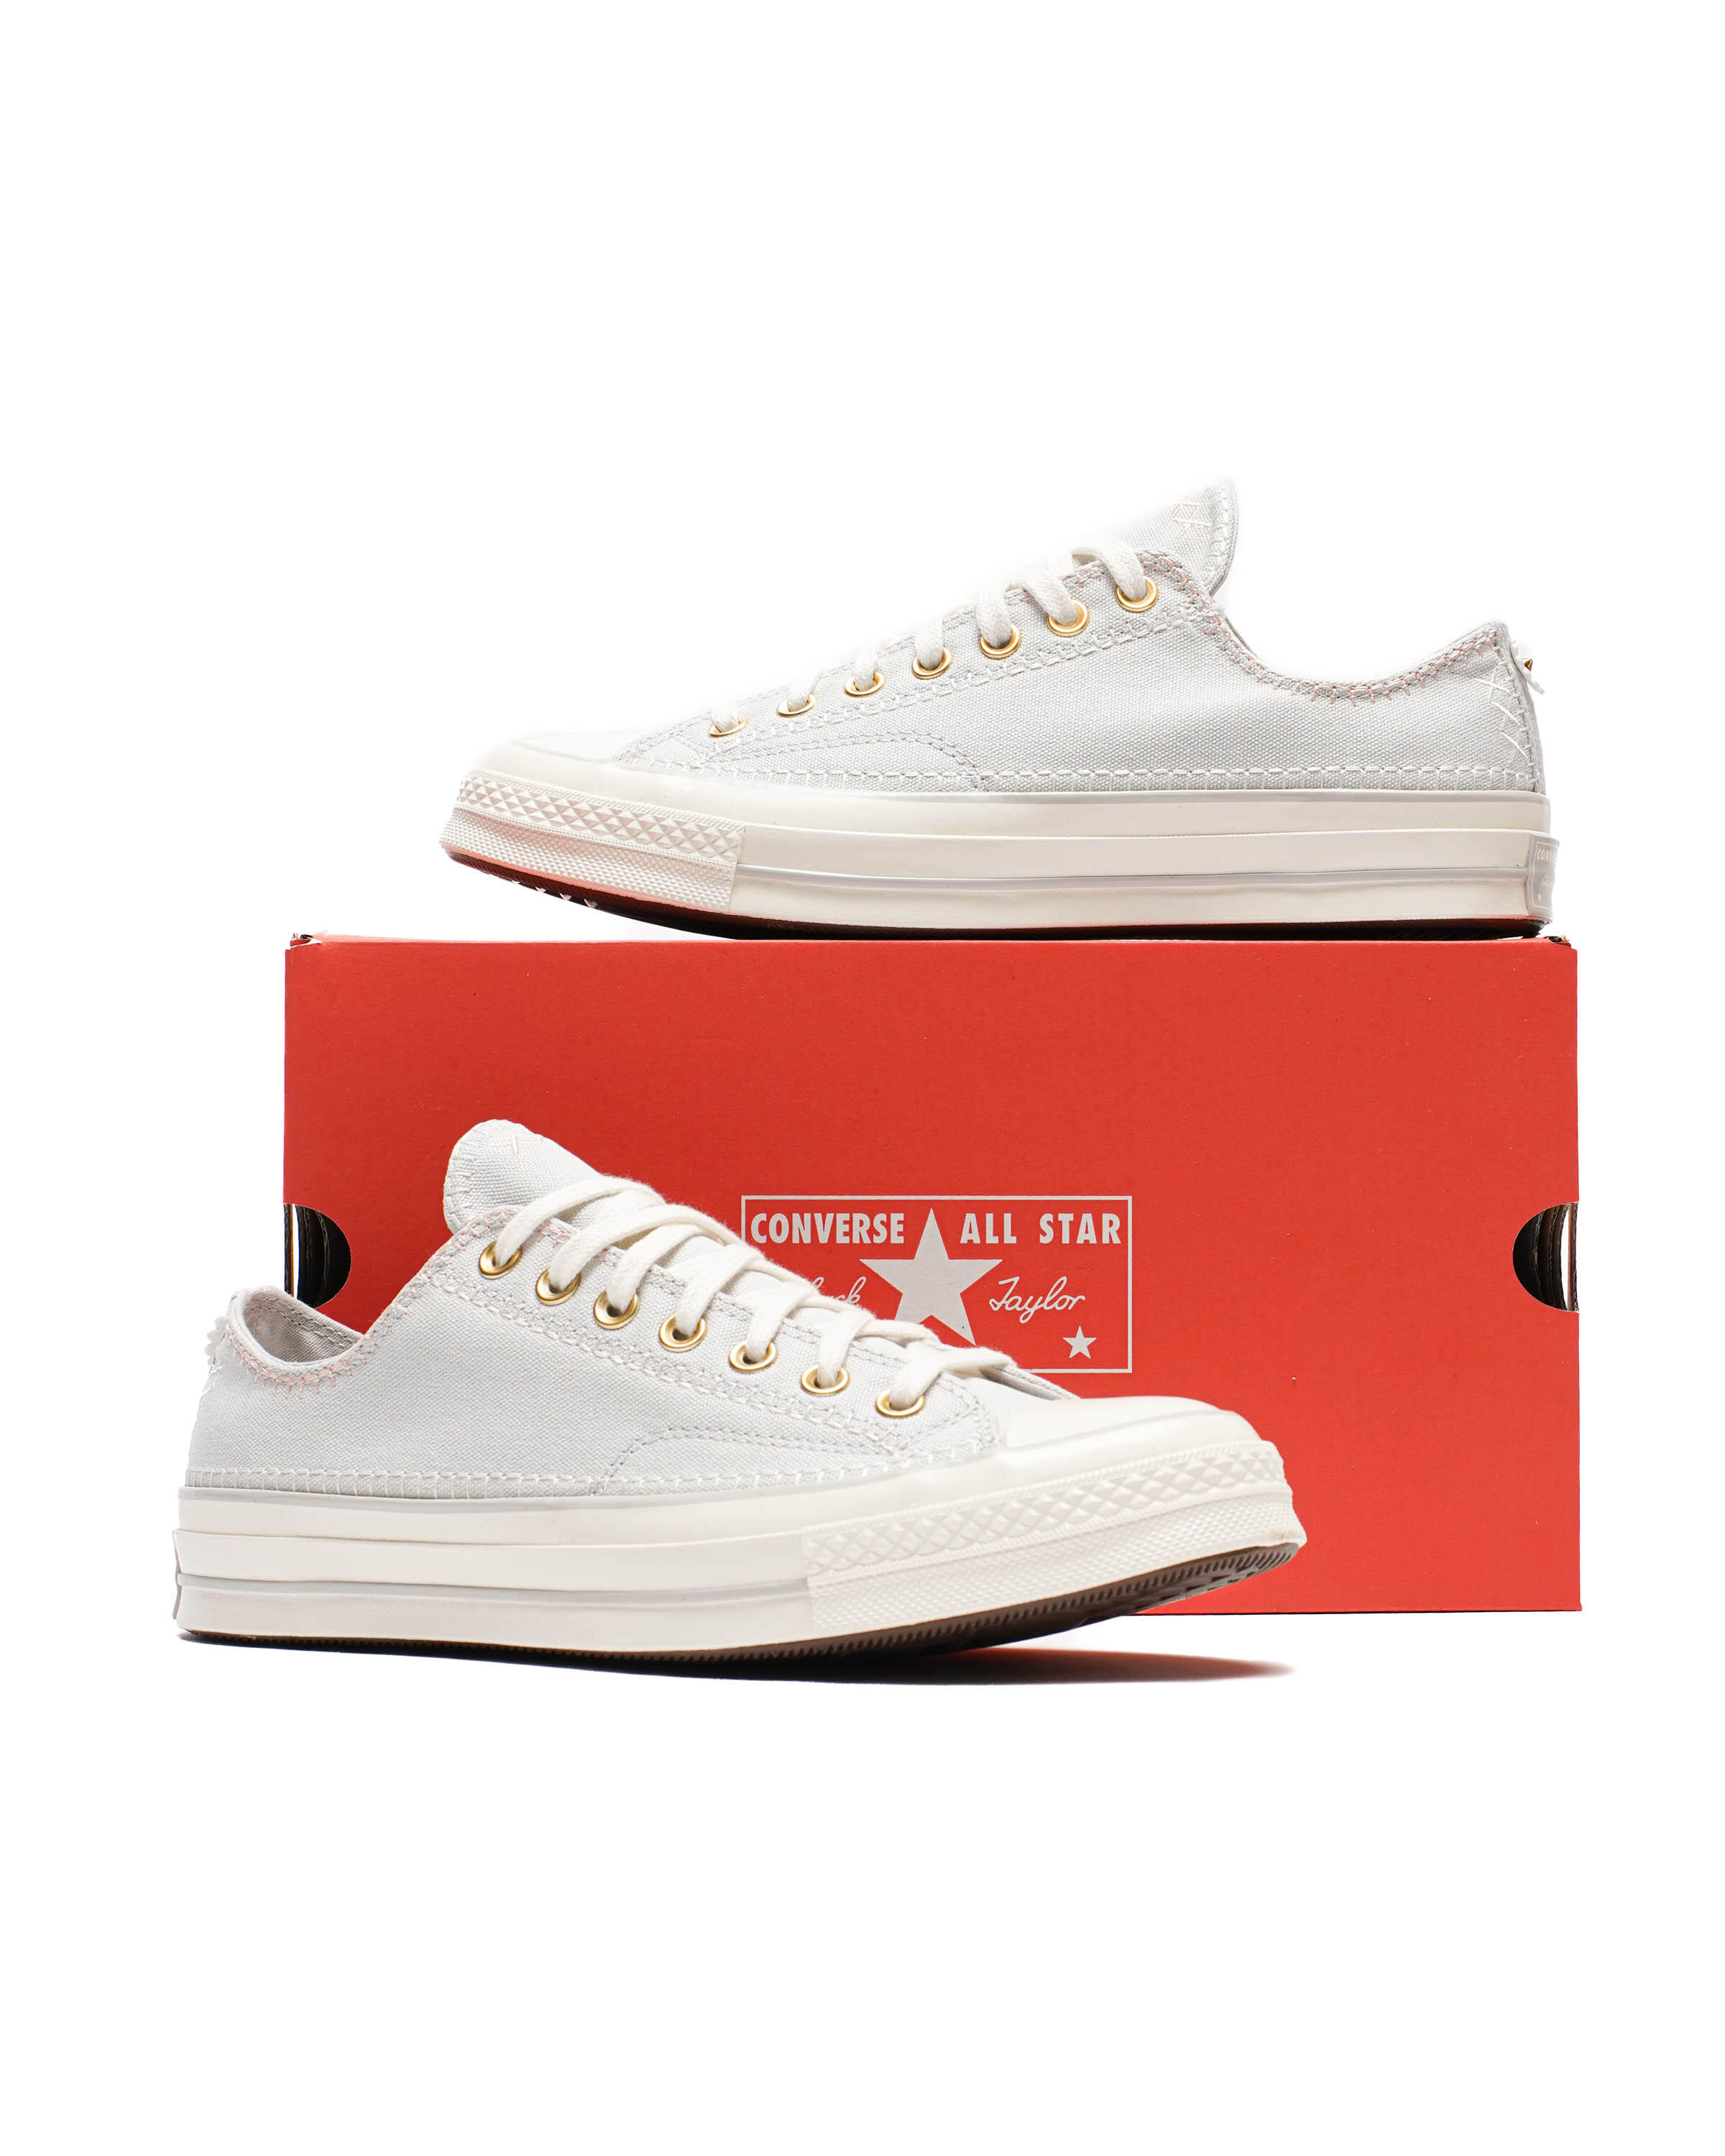 Converse CHUCK 70 OX Crafted Stitching | A09839C | AFEW STORE